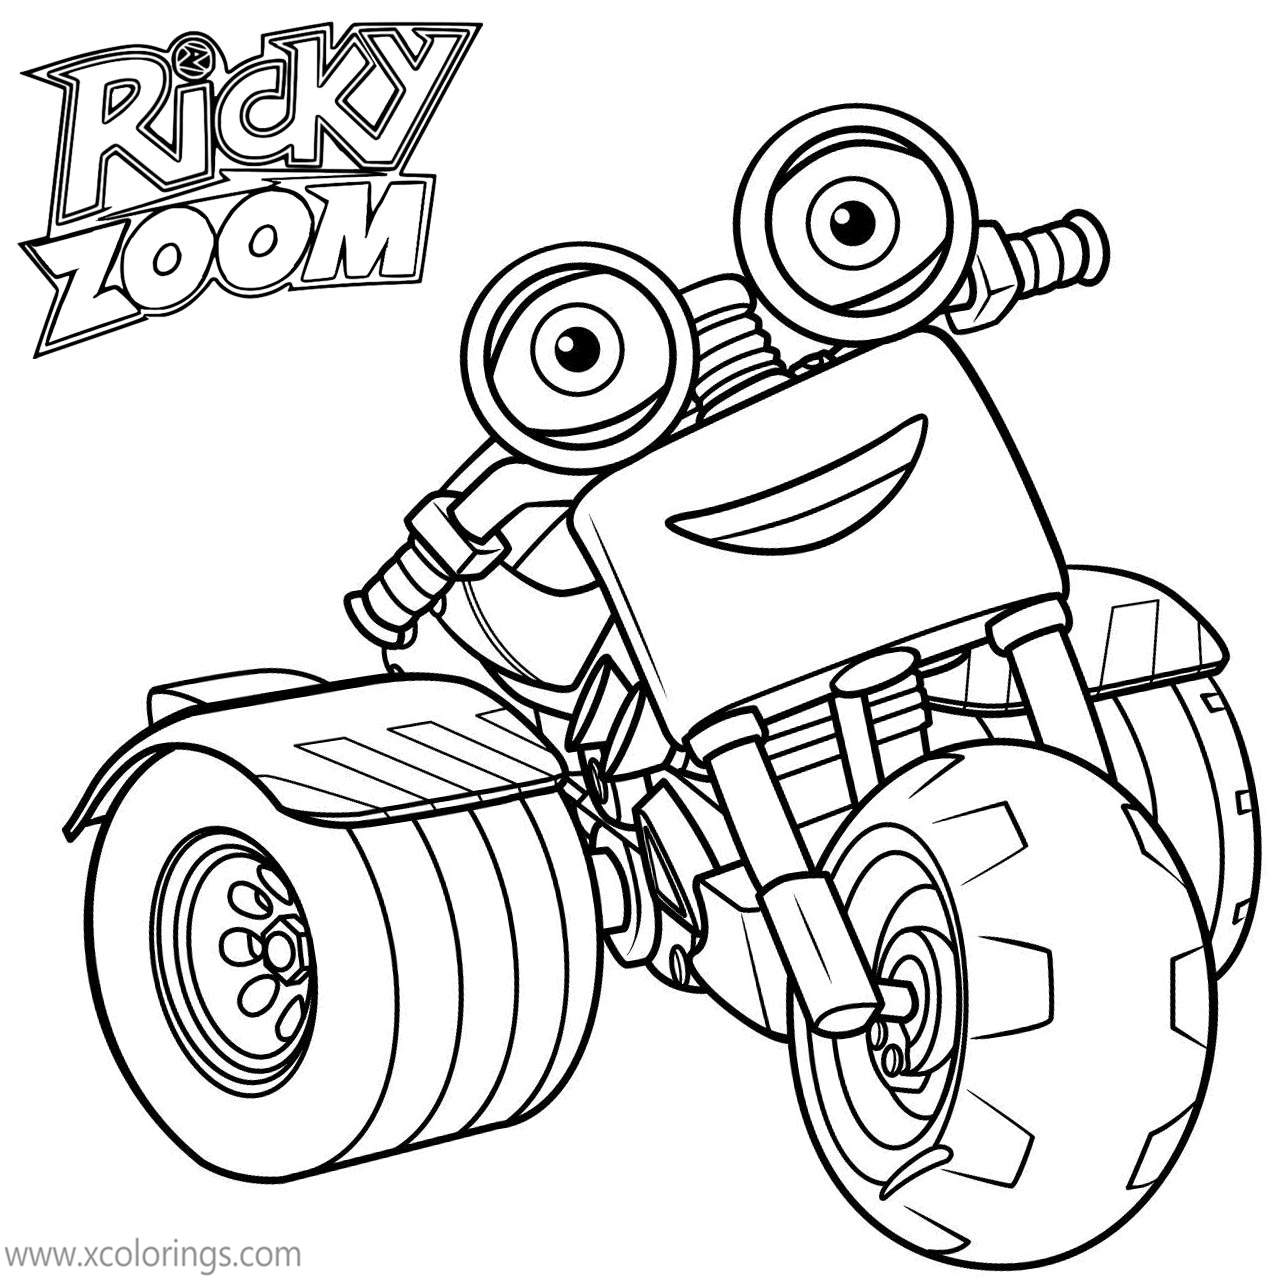 Free Ricky Zoom Coloring Pages DJ Rumbler printable